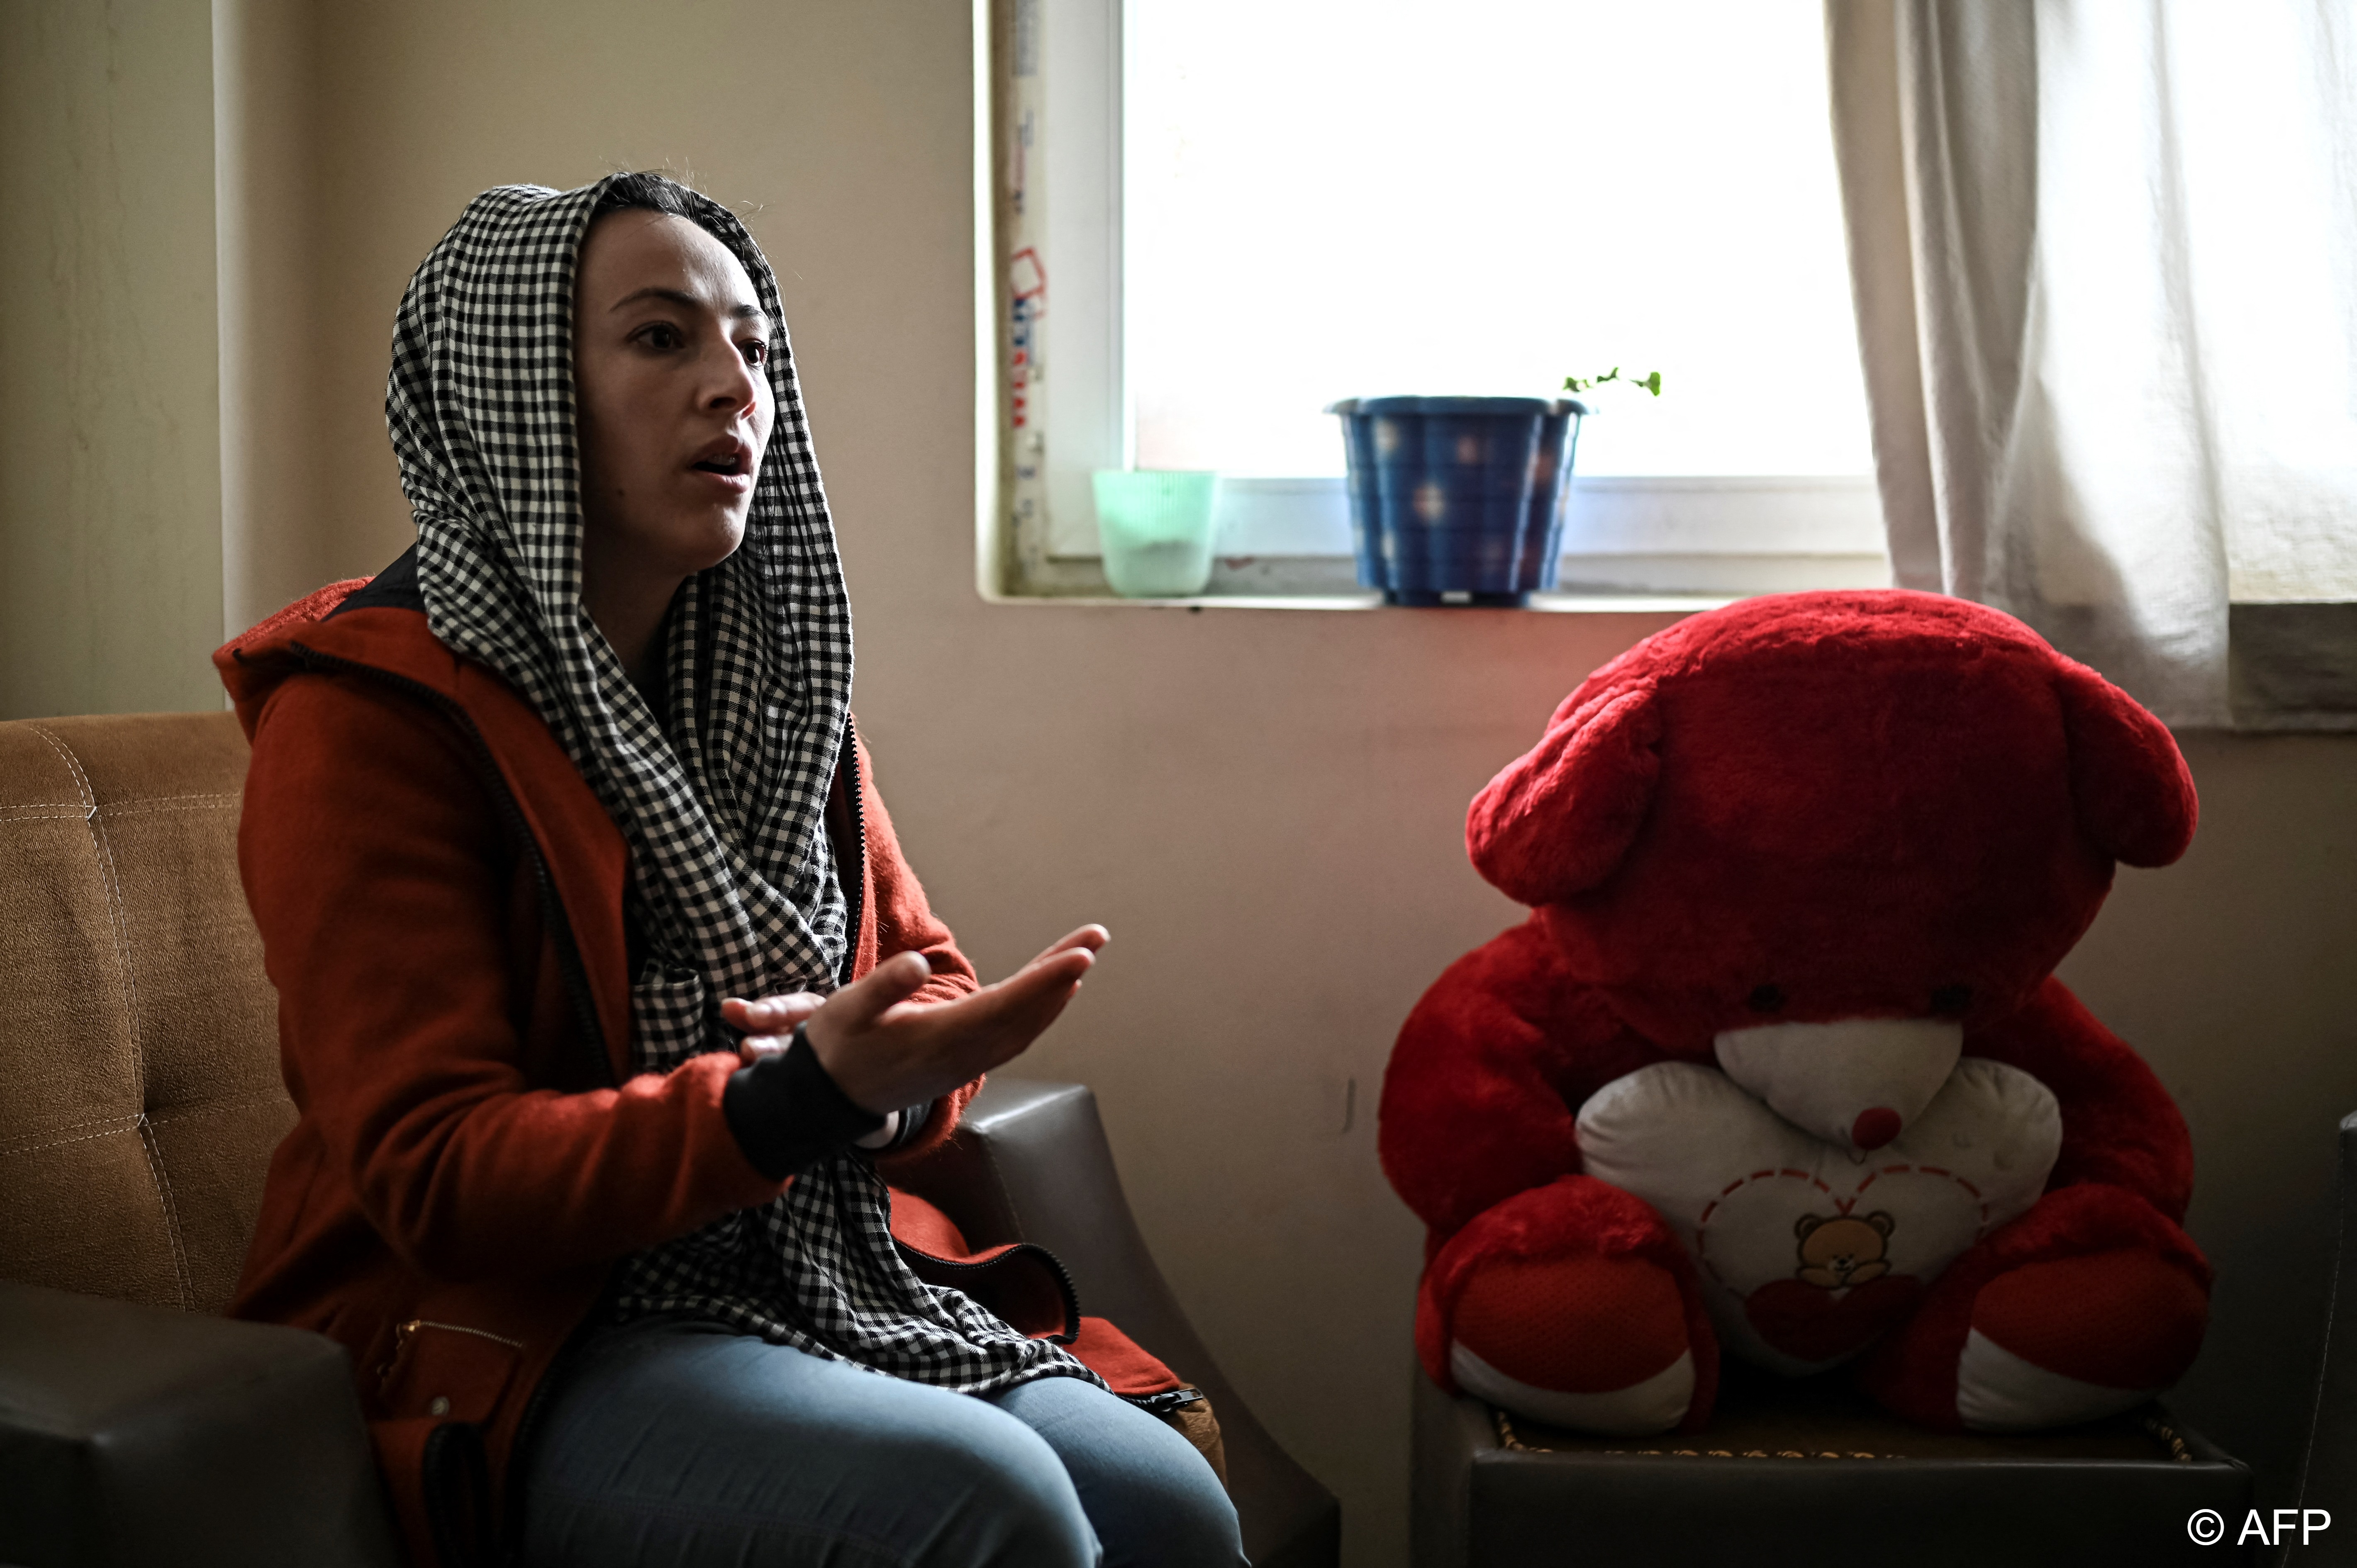 Hoda Khamosh, a published poet and former NGO worker who organised workshops to help empower women, was one of a few women flown to Norway to meet face to face with the Taliban's leadership last month (photo: Mohd RASFAN/AFP) 